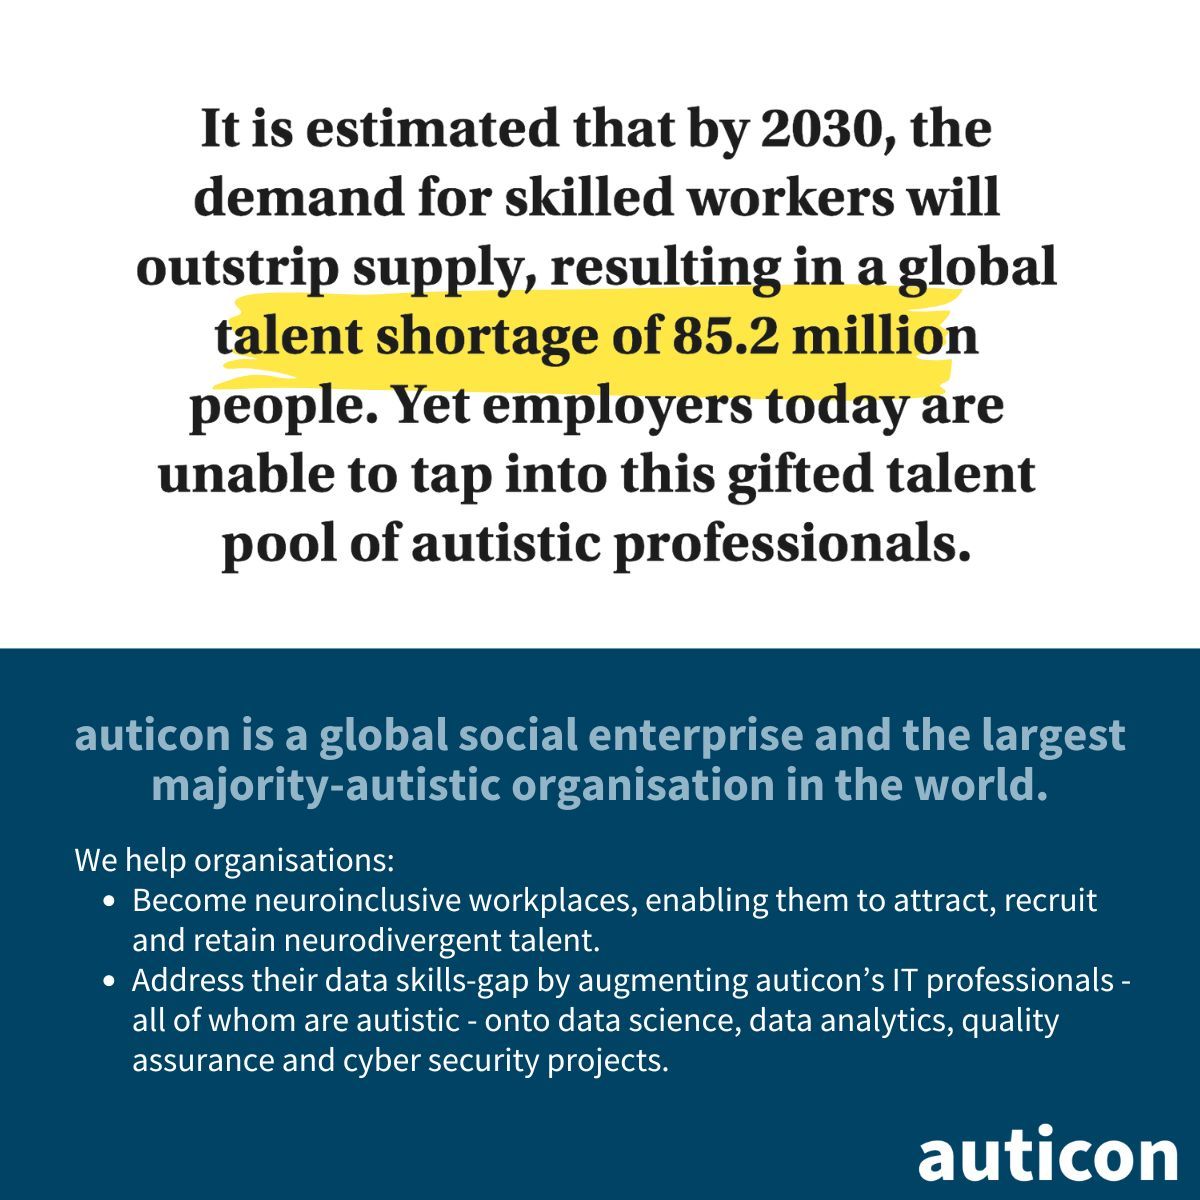 auticon is enabling businesses to attract, recruit and retain autistic and neurodivergent people. Contact us to find out more. #neuroinclusion #neurodiversity #neurodivergence #neurodiversitytraining #neuroinclusionadvisory #neurodivergentcoaching #managercoaching #EDI #D&I